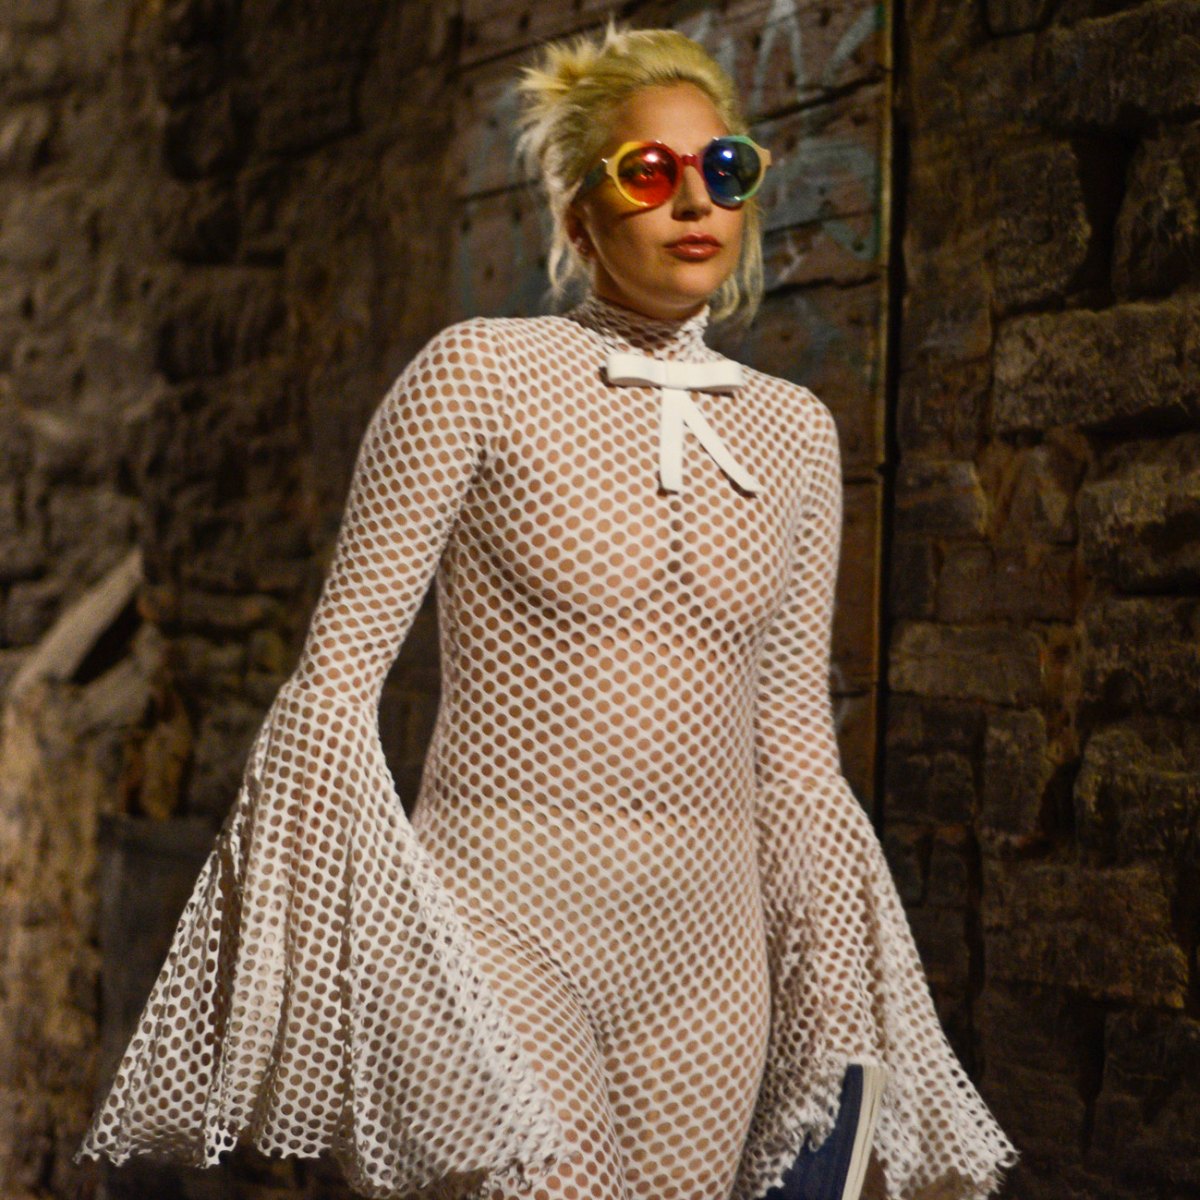 Lady Gaga - Lady Gaga Braless in New Outfit